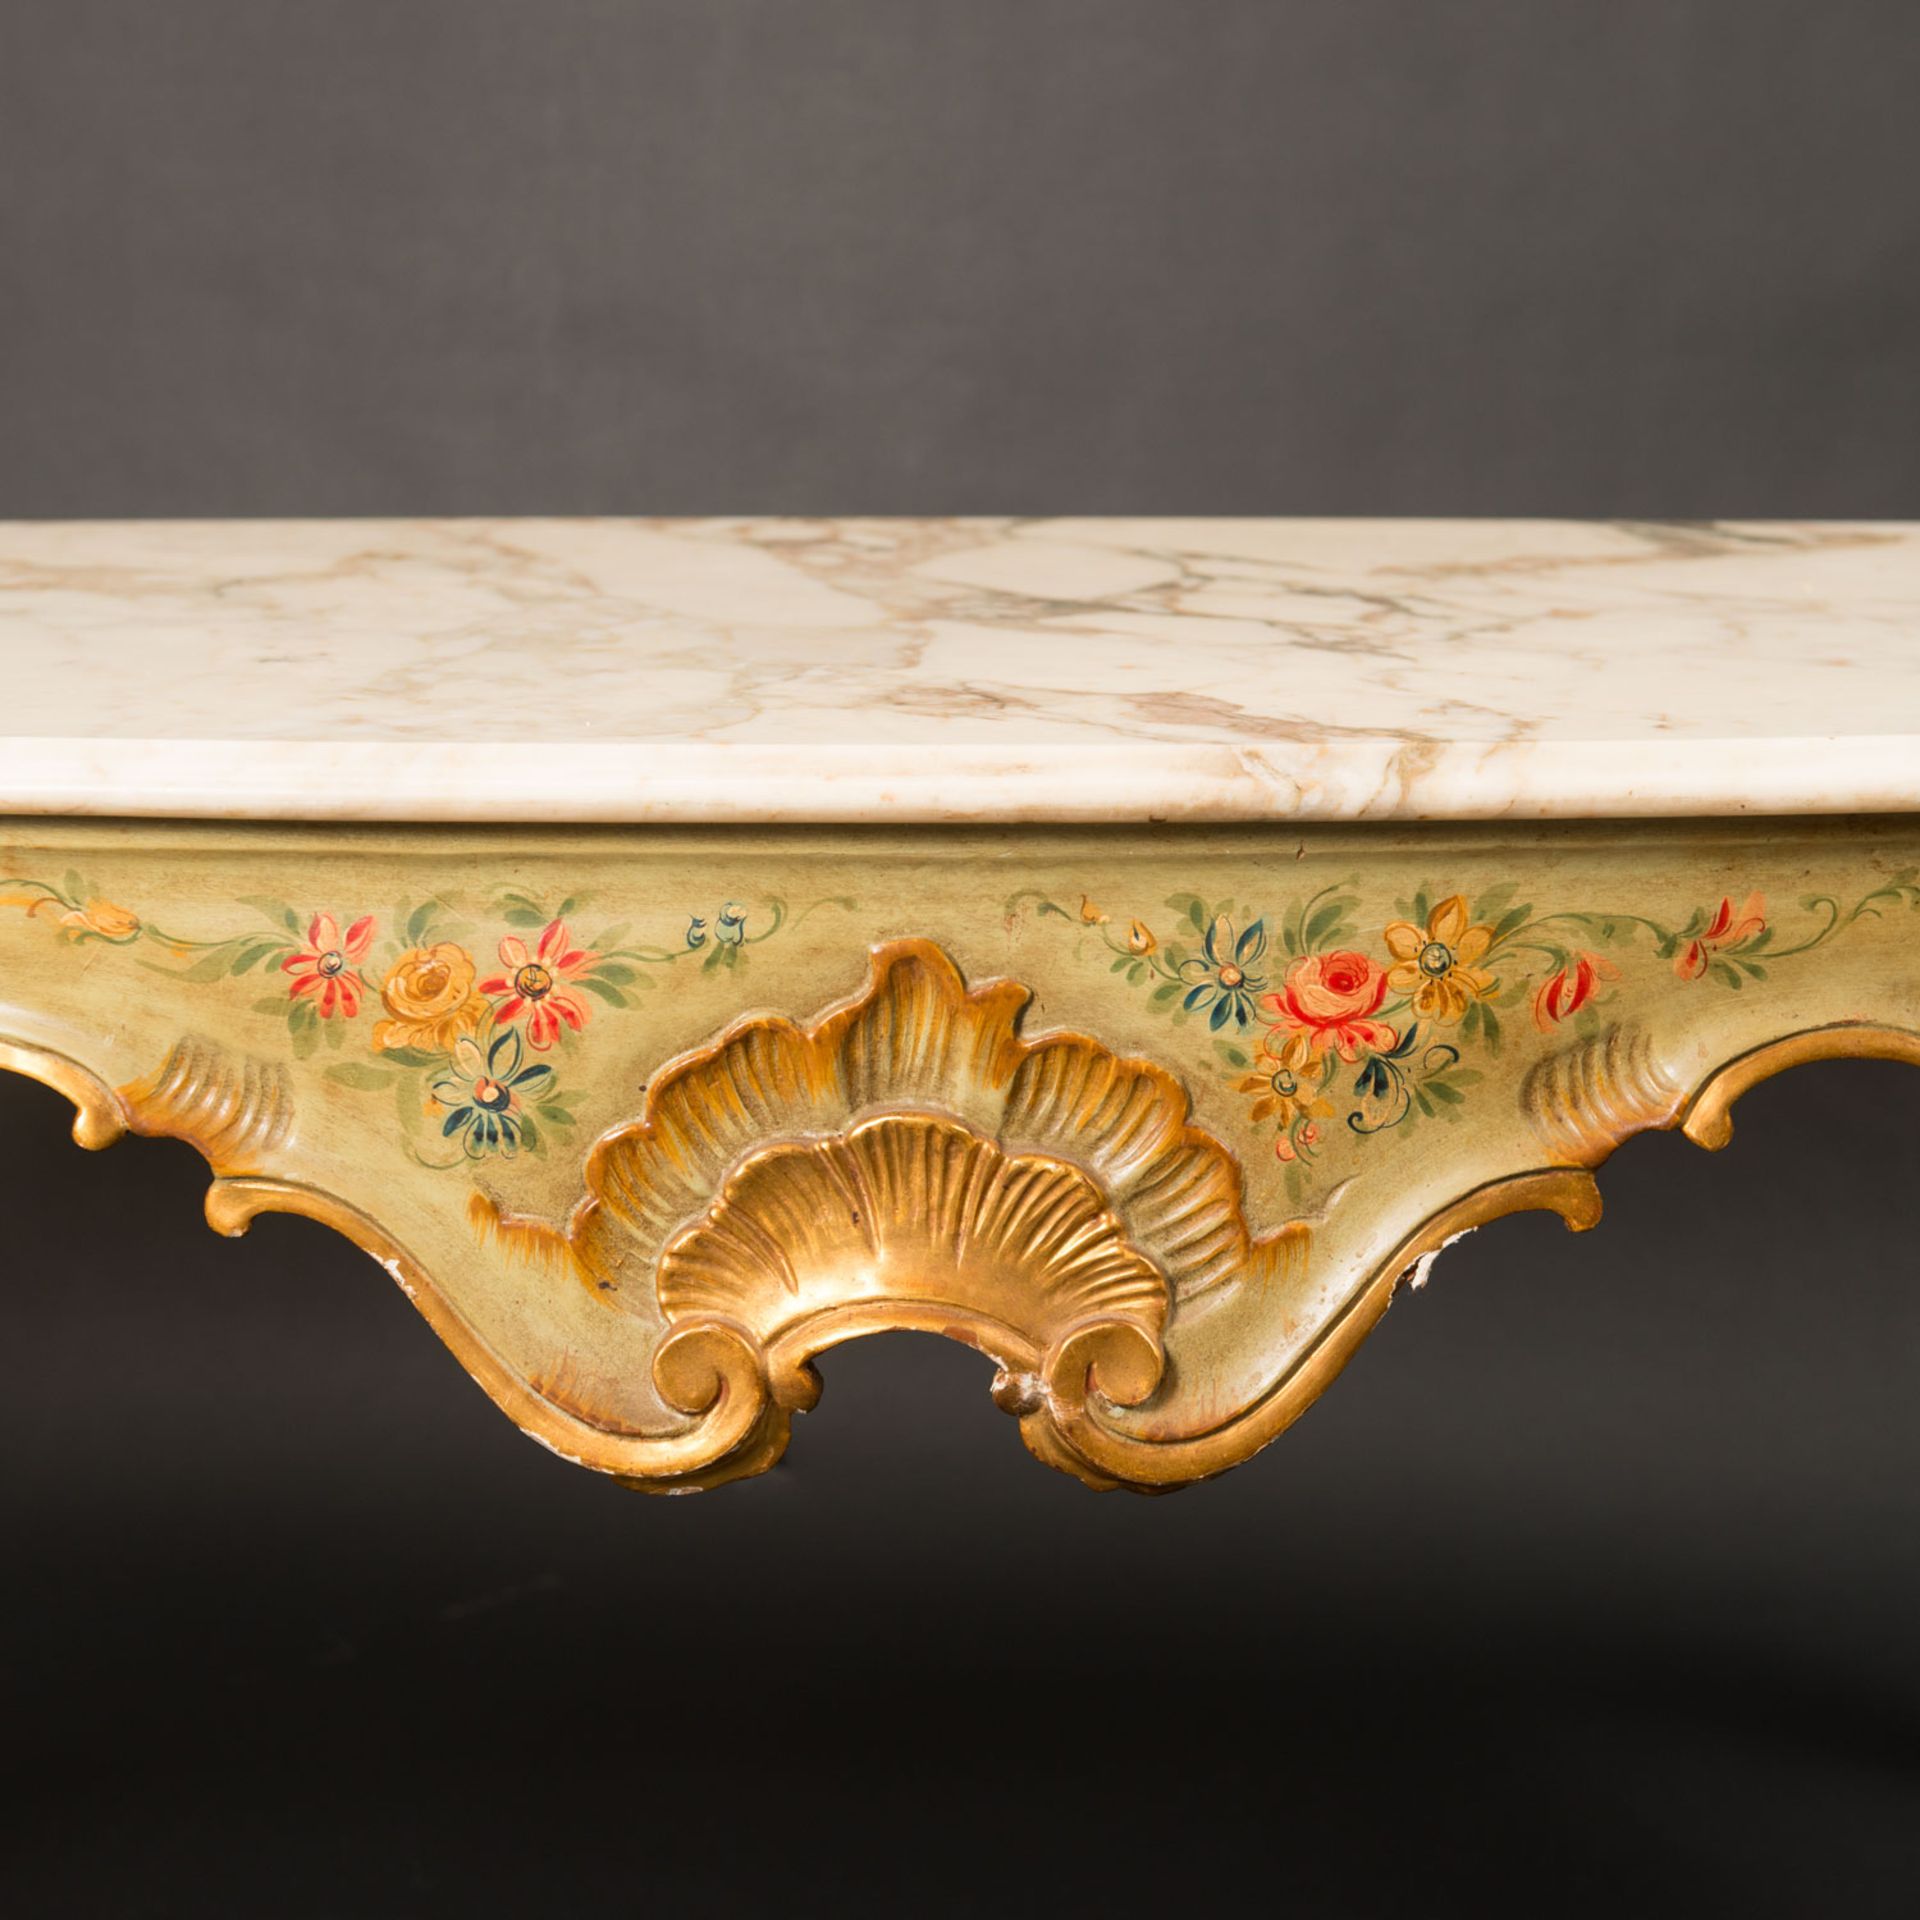 Venetian Sofa Table, in Baroque style, carved ornaments with lacquer decorations, white marble - Image 3 of 3